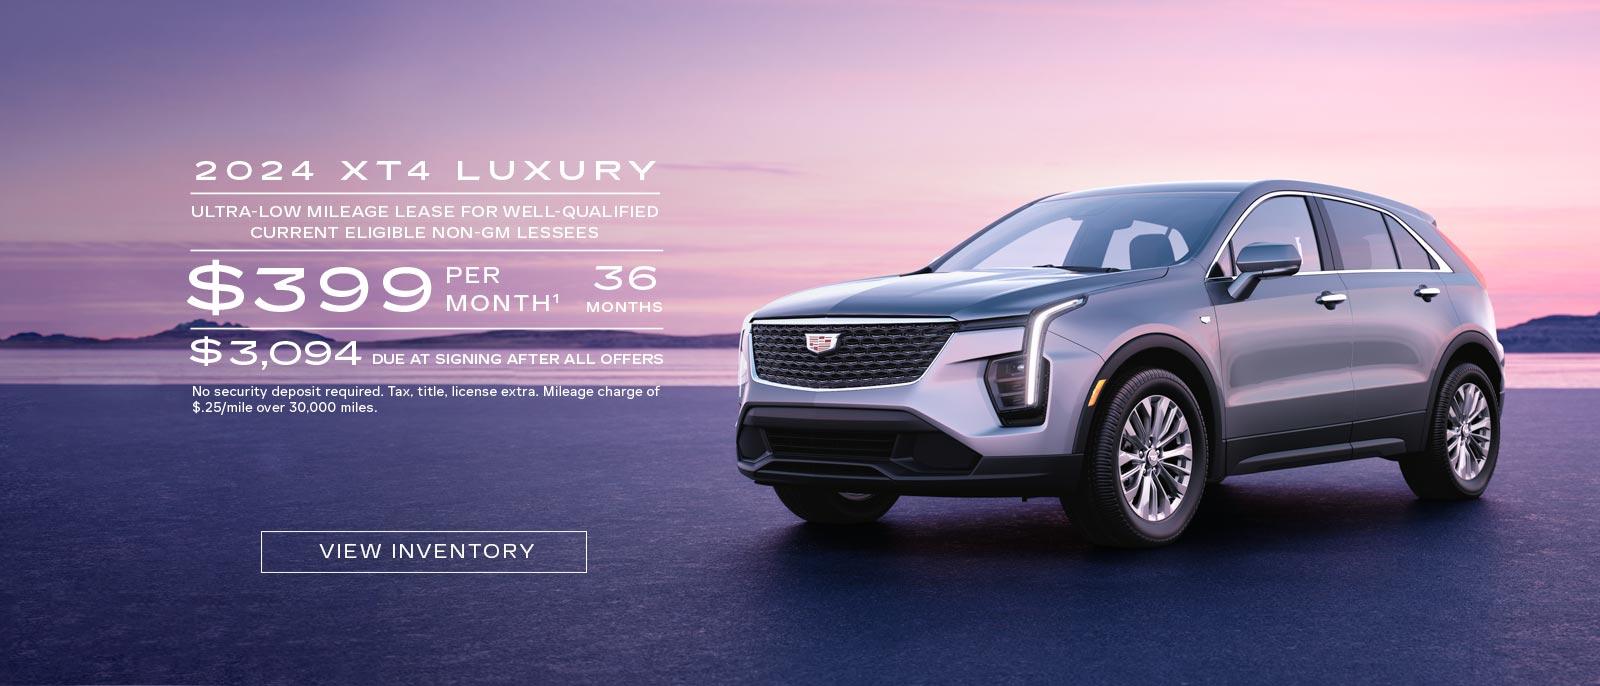 2024 XT4 Luxury. Ultra-low mileage lease for well-qualified current eligible Cadillac lessees. $399 per month. 36 months. $3,094 due at signing after all offers.